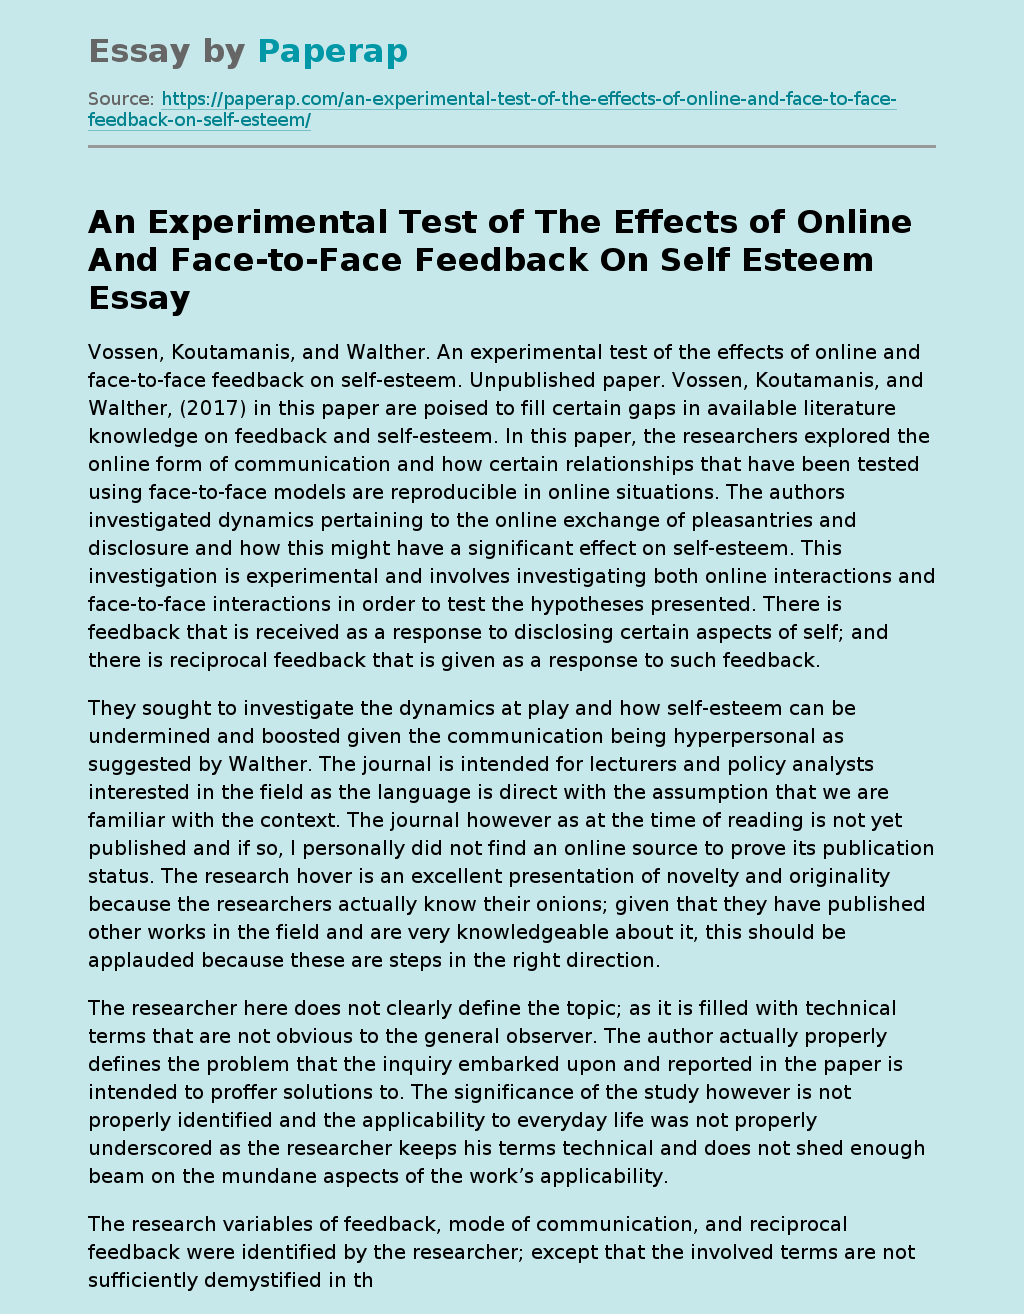 An Experimental Test of The Effects of Online And Face-to-Face Feedback On Self Esteem